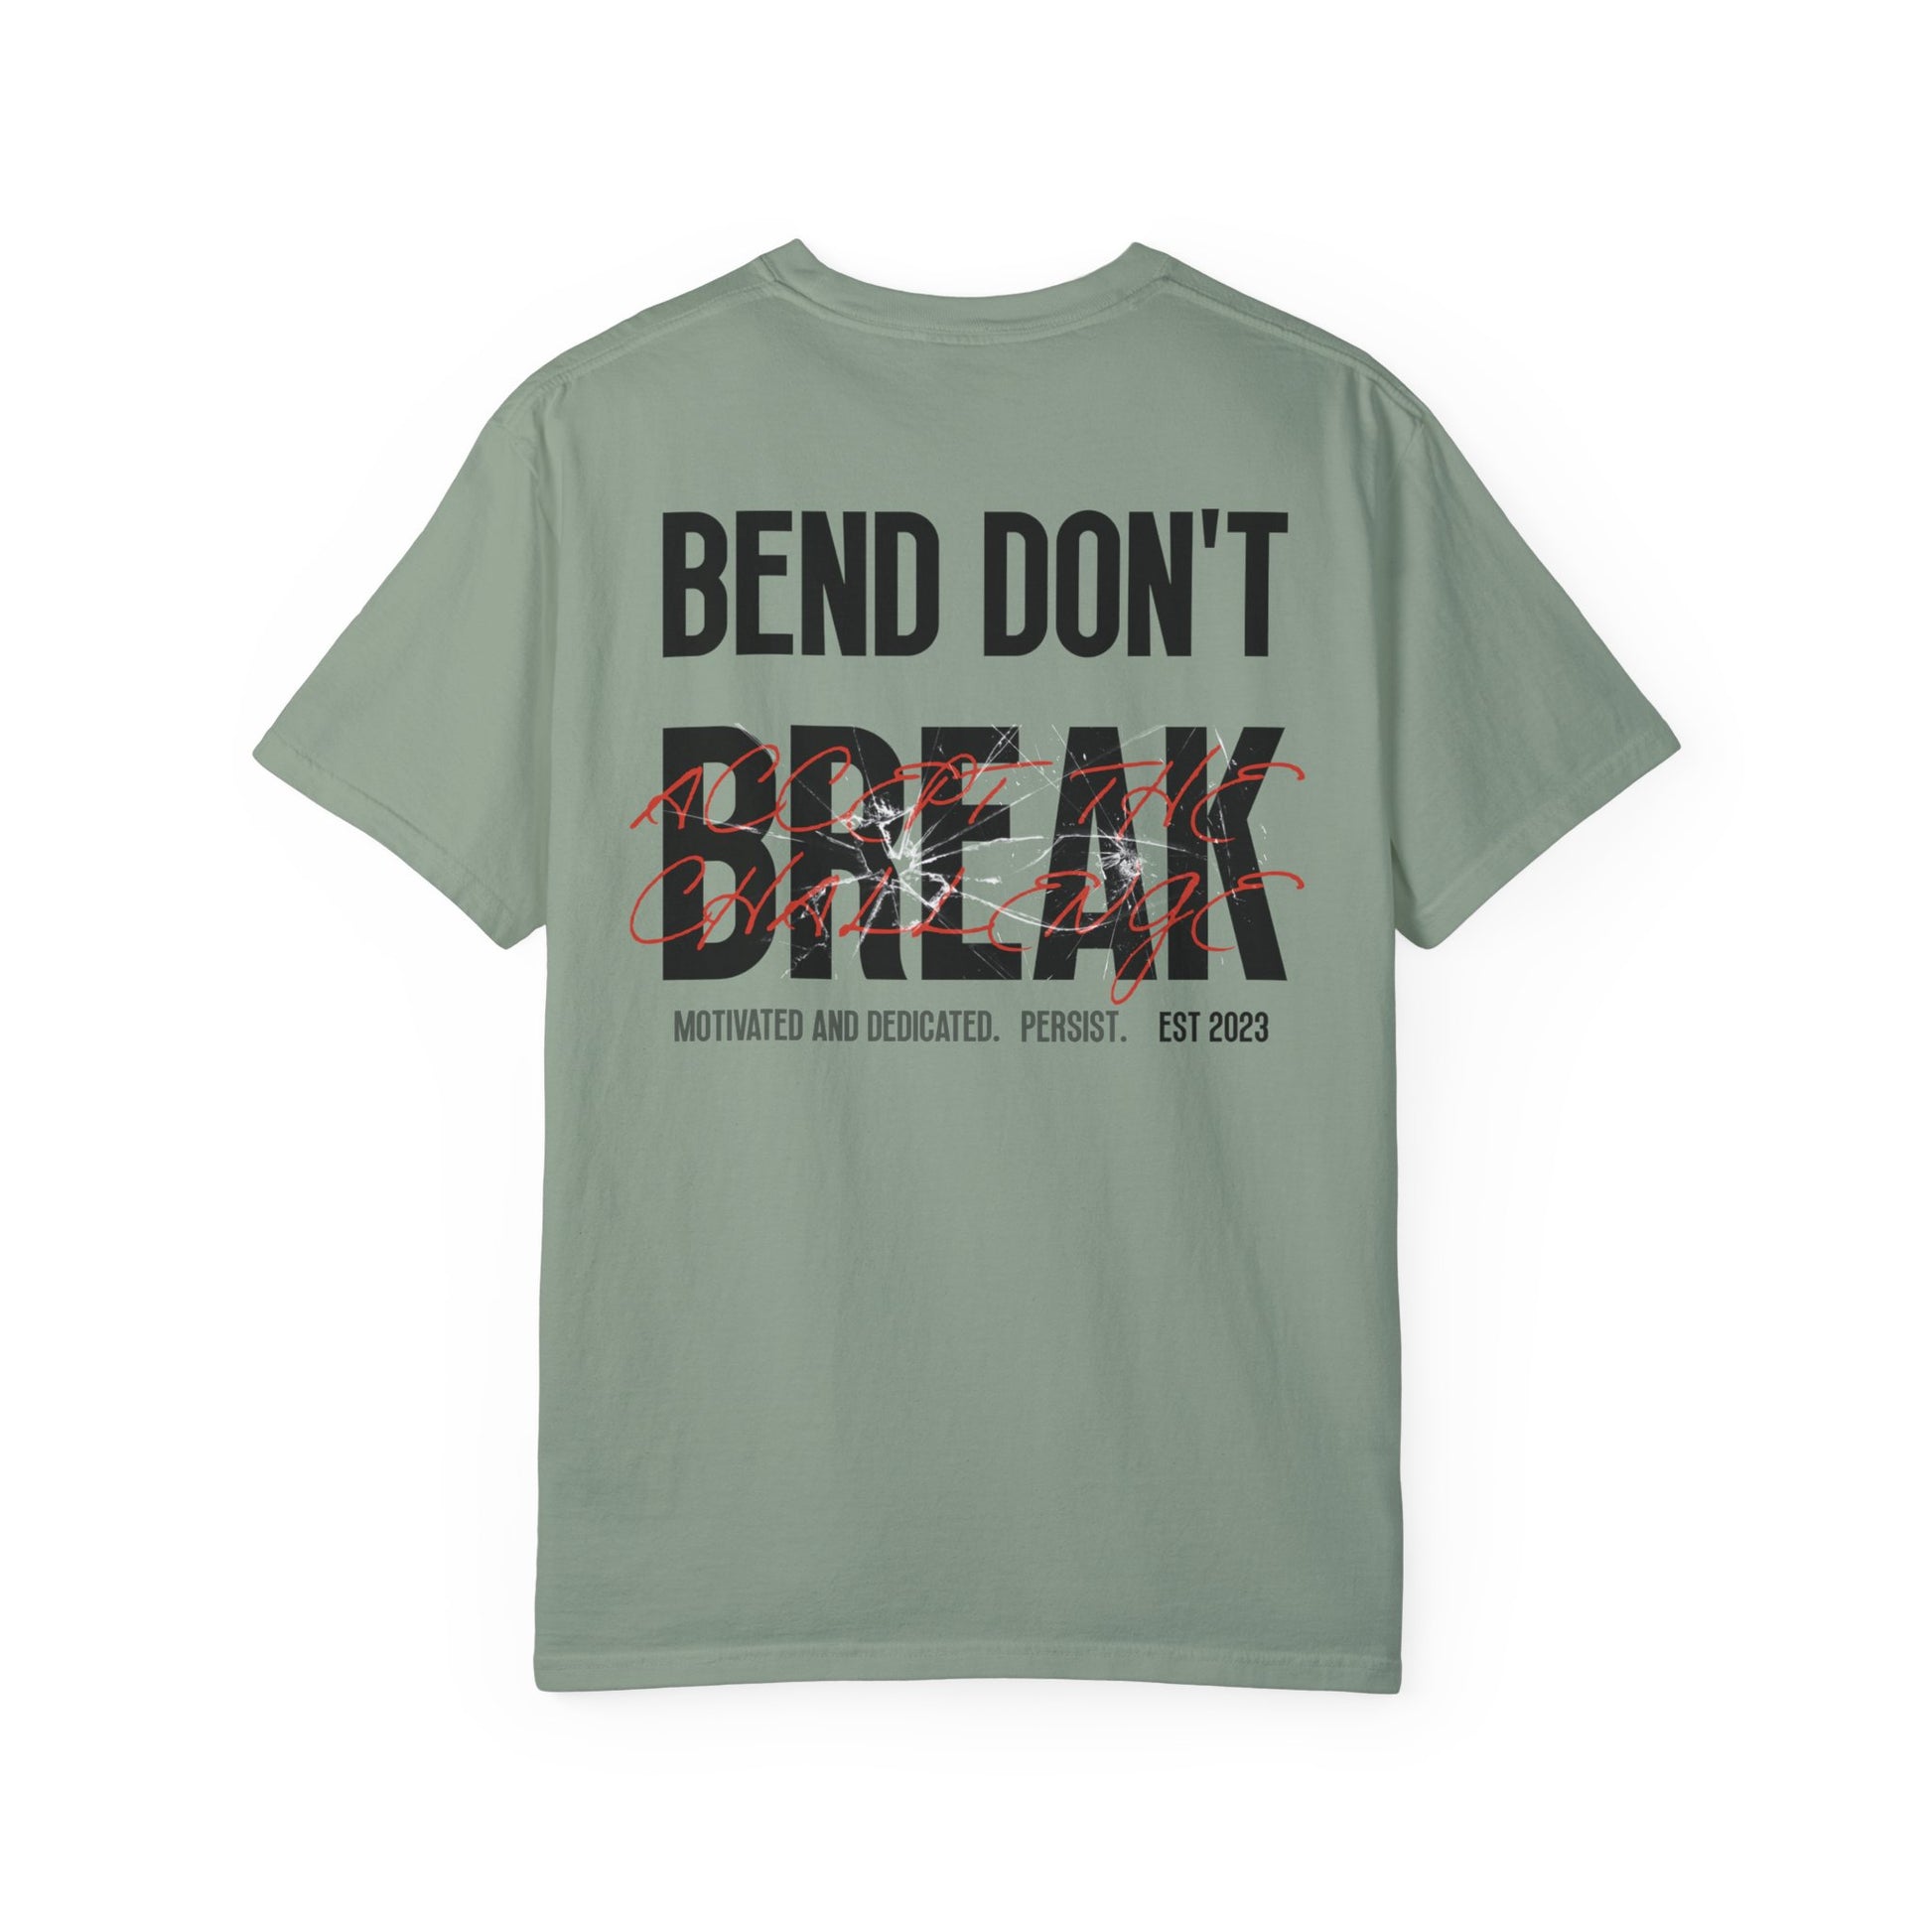 Casual Bay T-Shirt w/ Text And Broken Glass Graphic